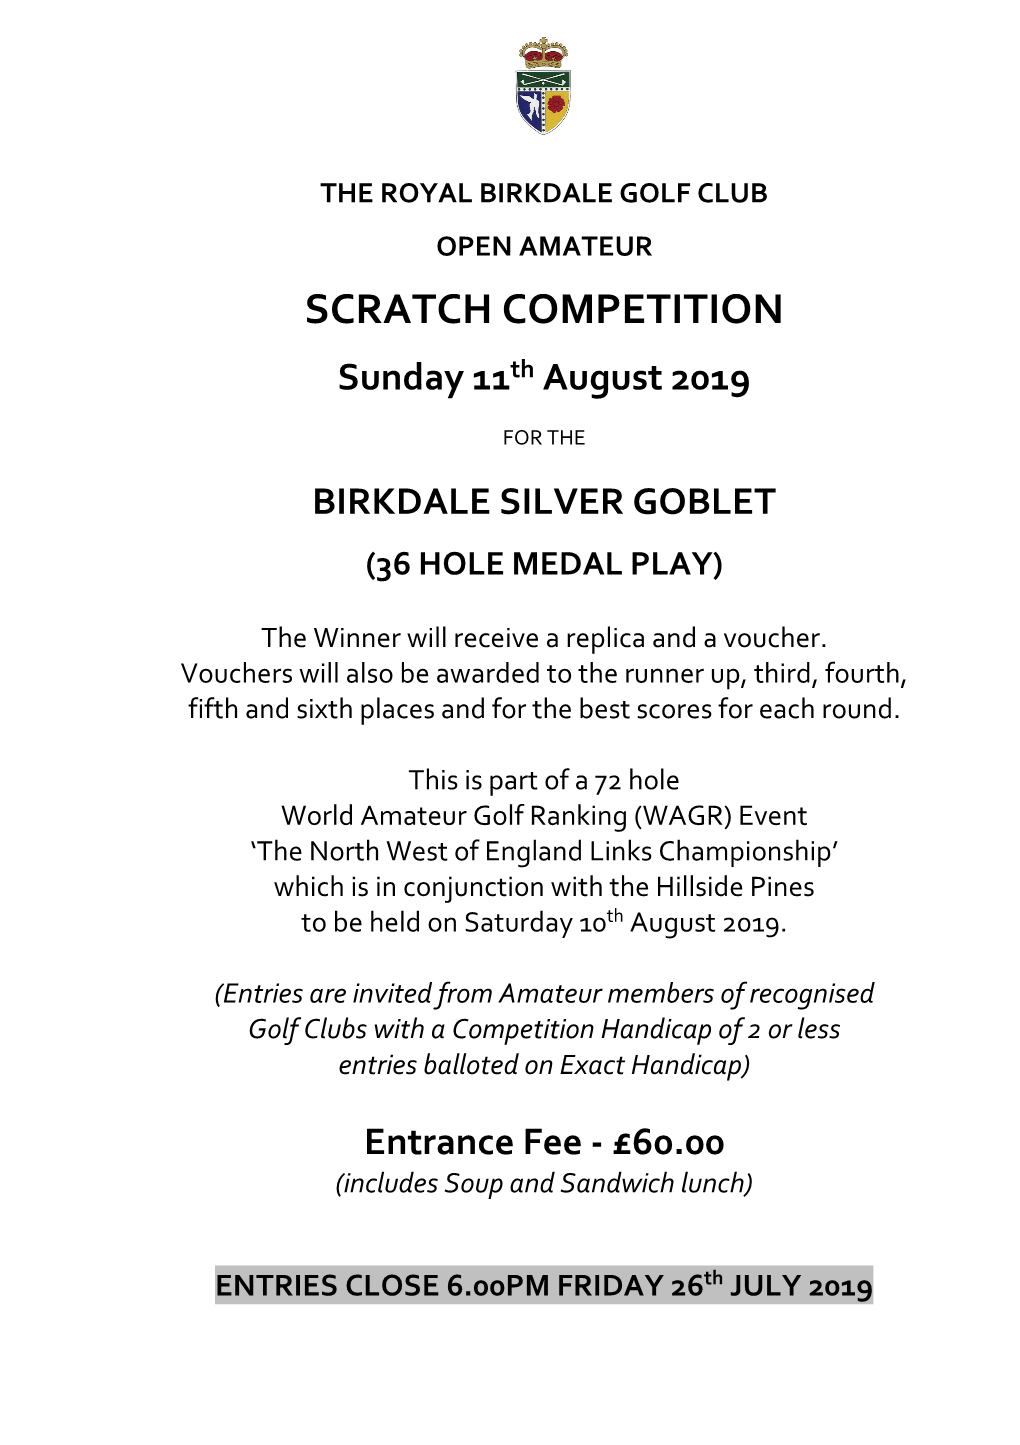 Scratch Competition